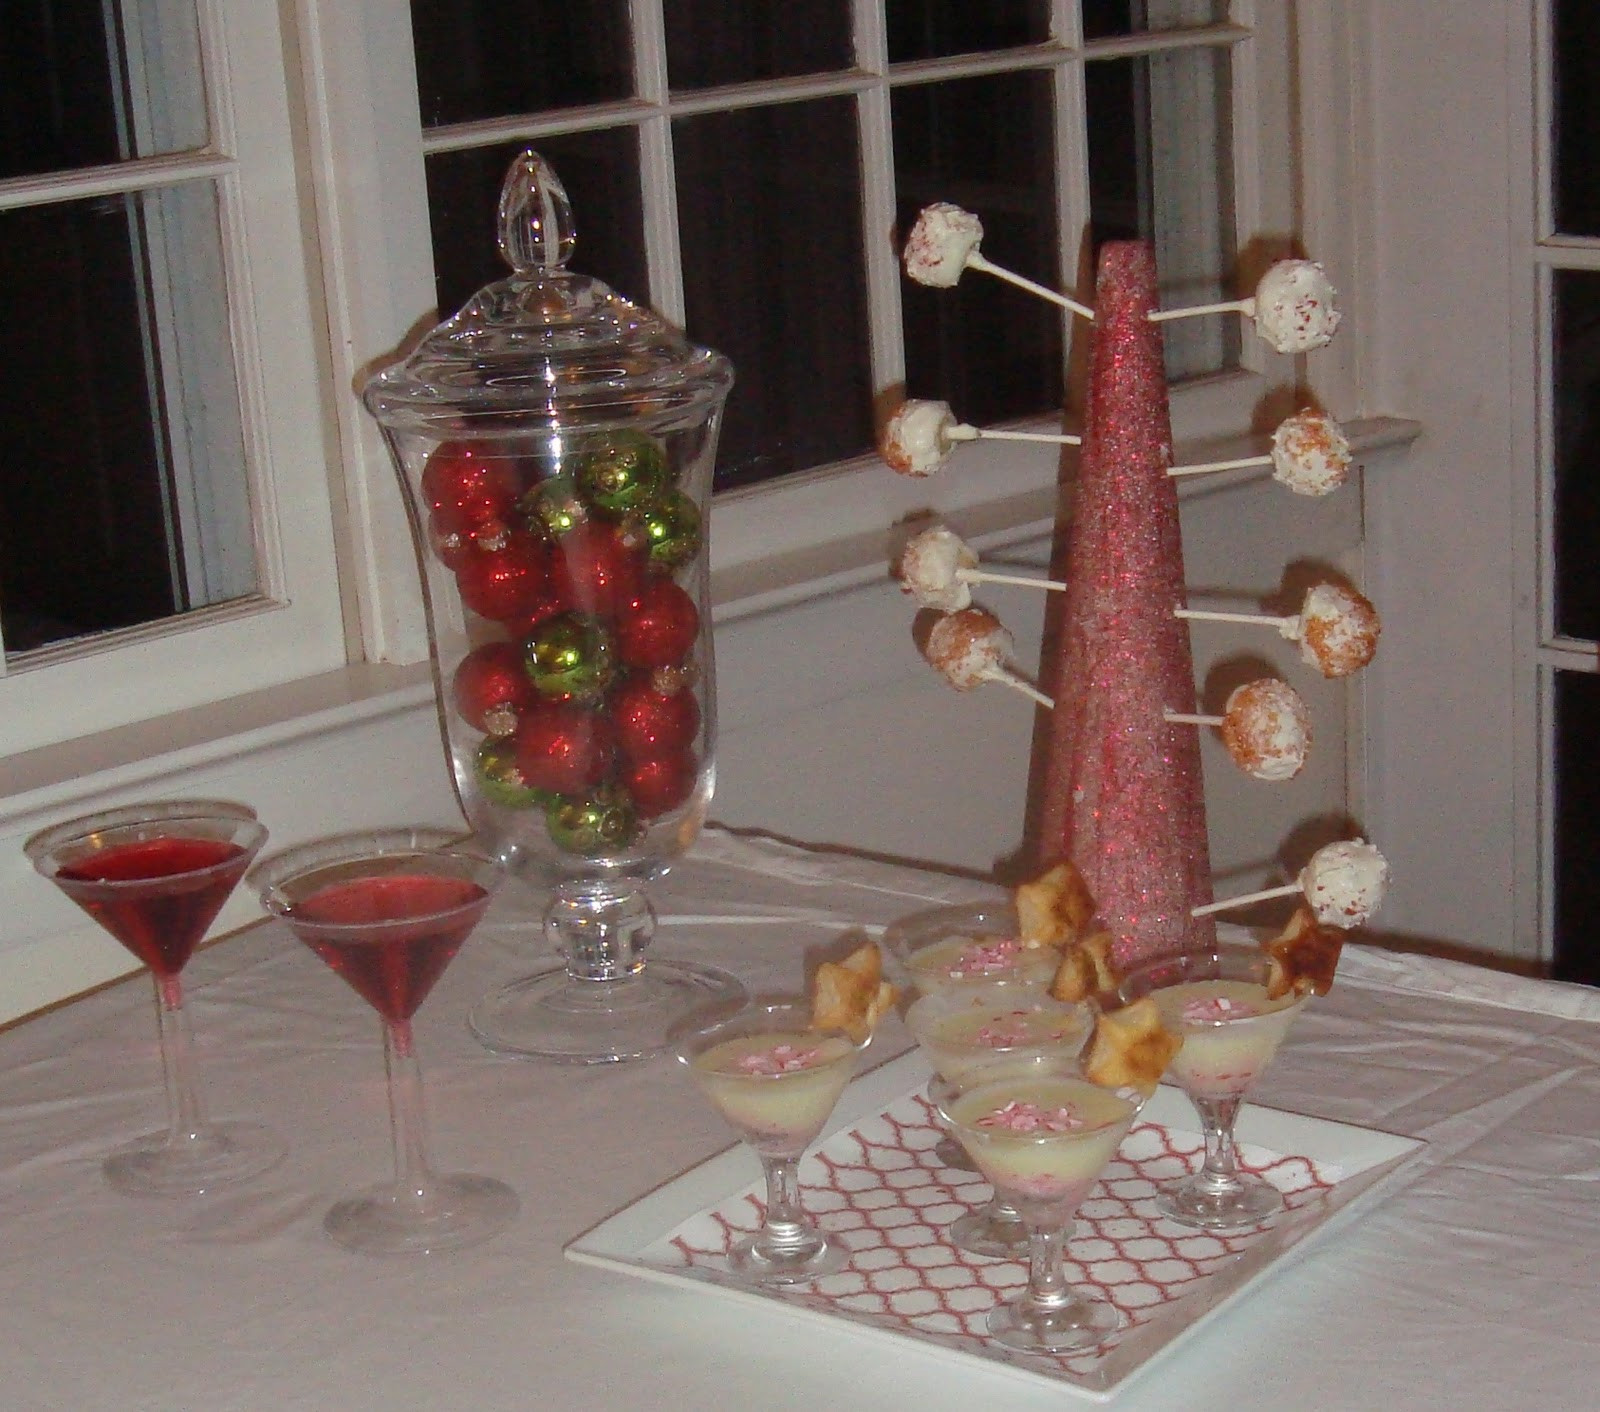 Cocktail Party Desserts
 Megan’s Parties & Good Eats Holiday Dessert & Cocktail Party